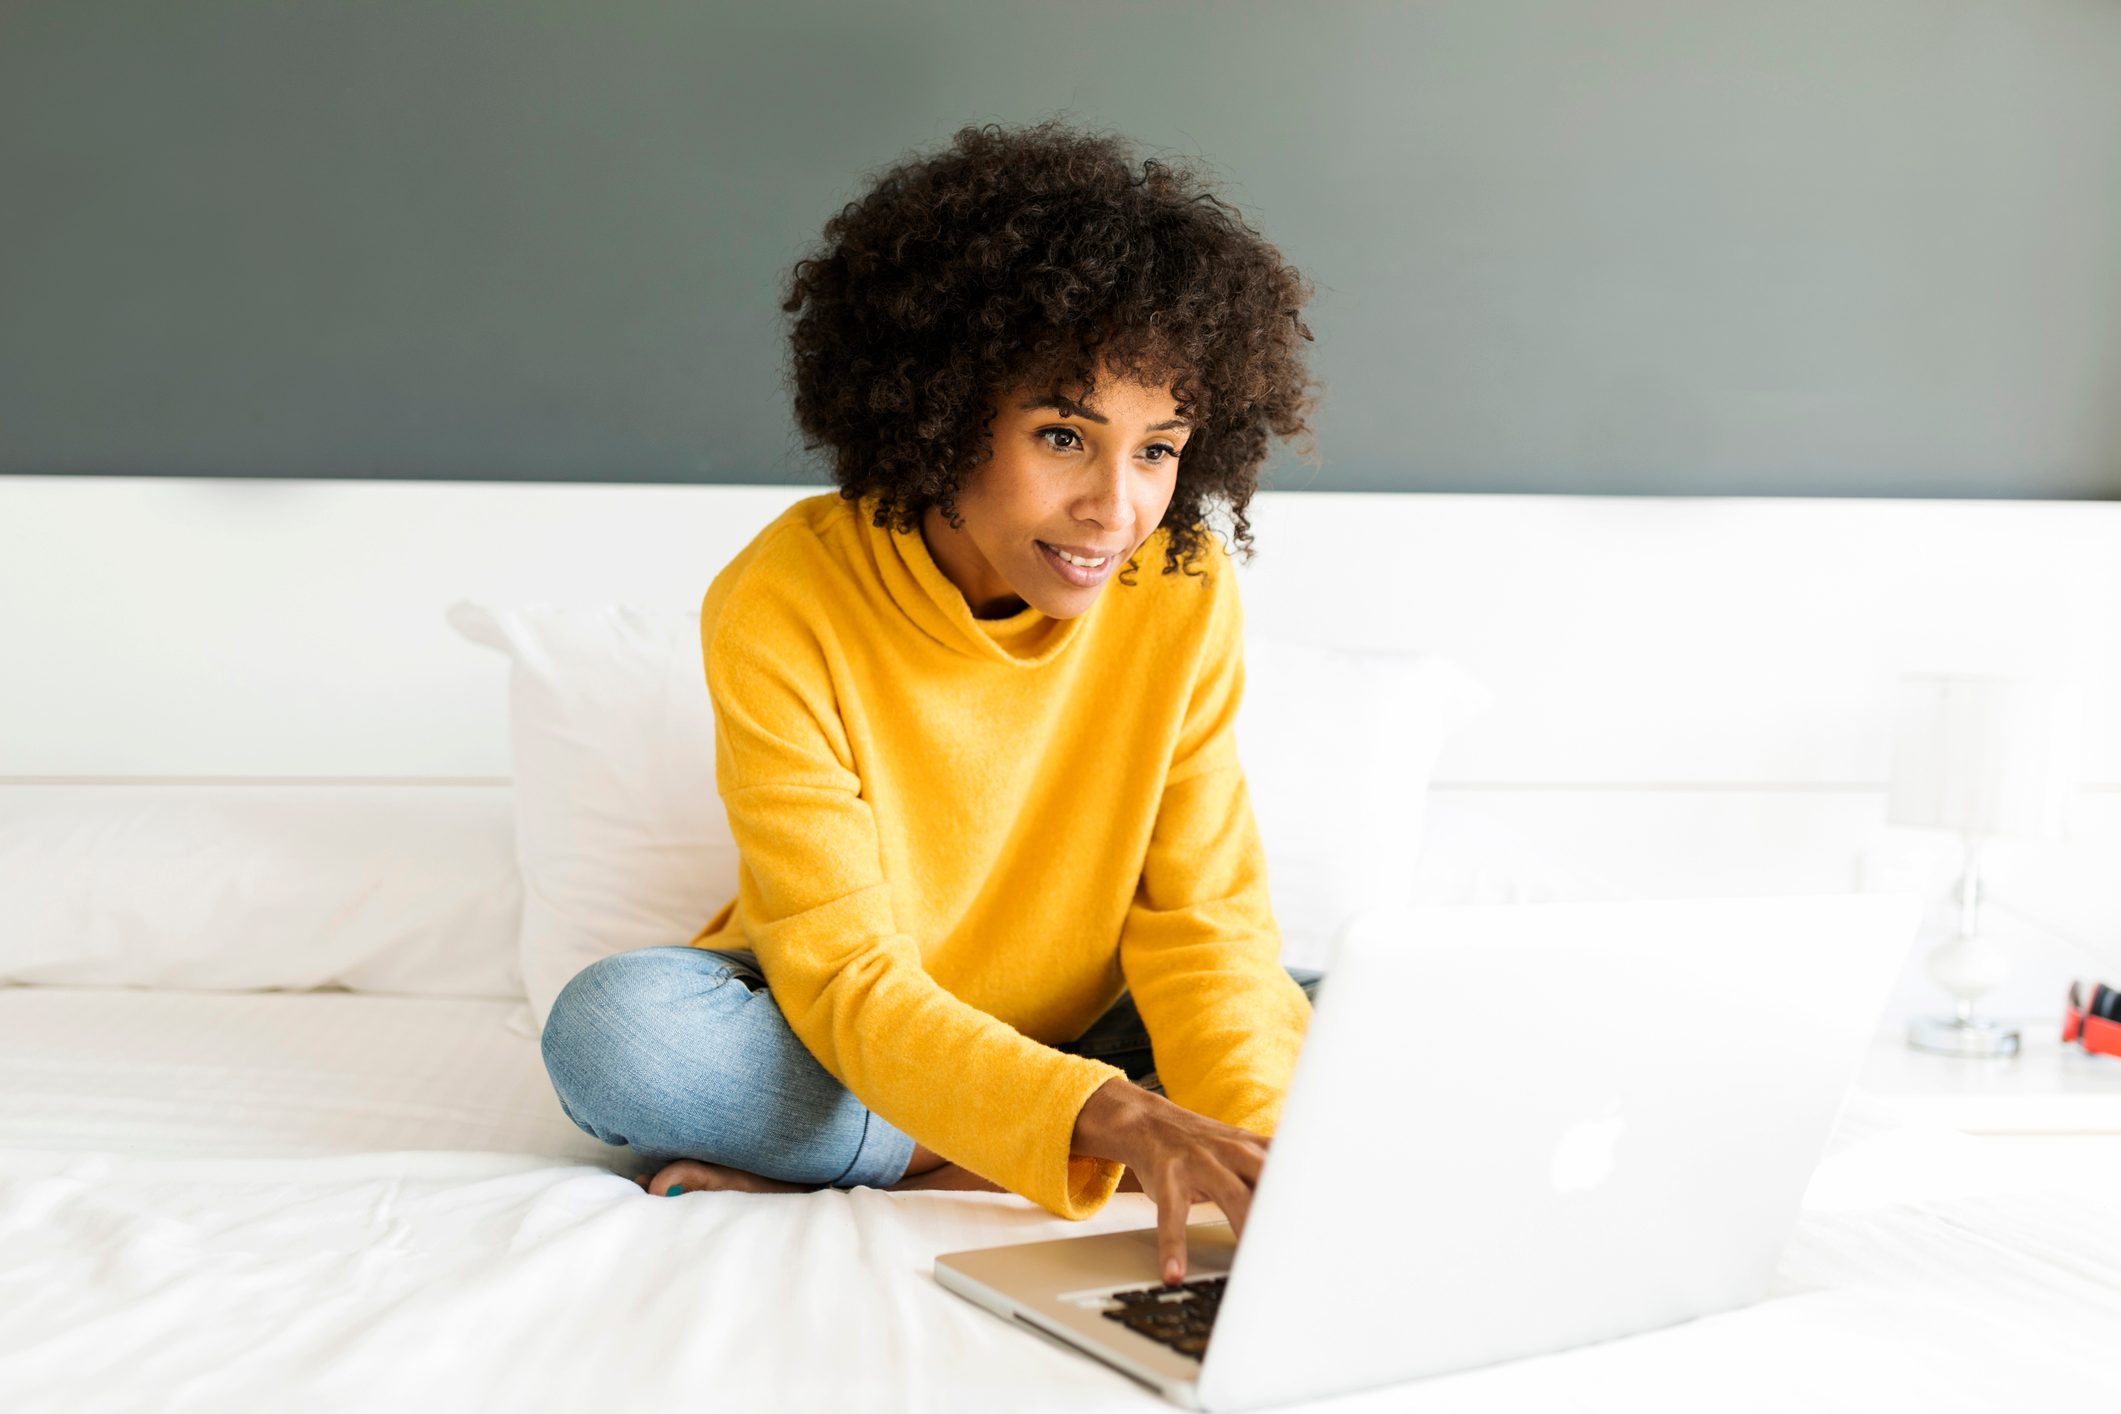 Smiling woman sitting on bed using laptop